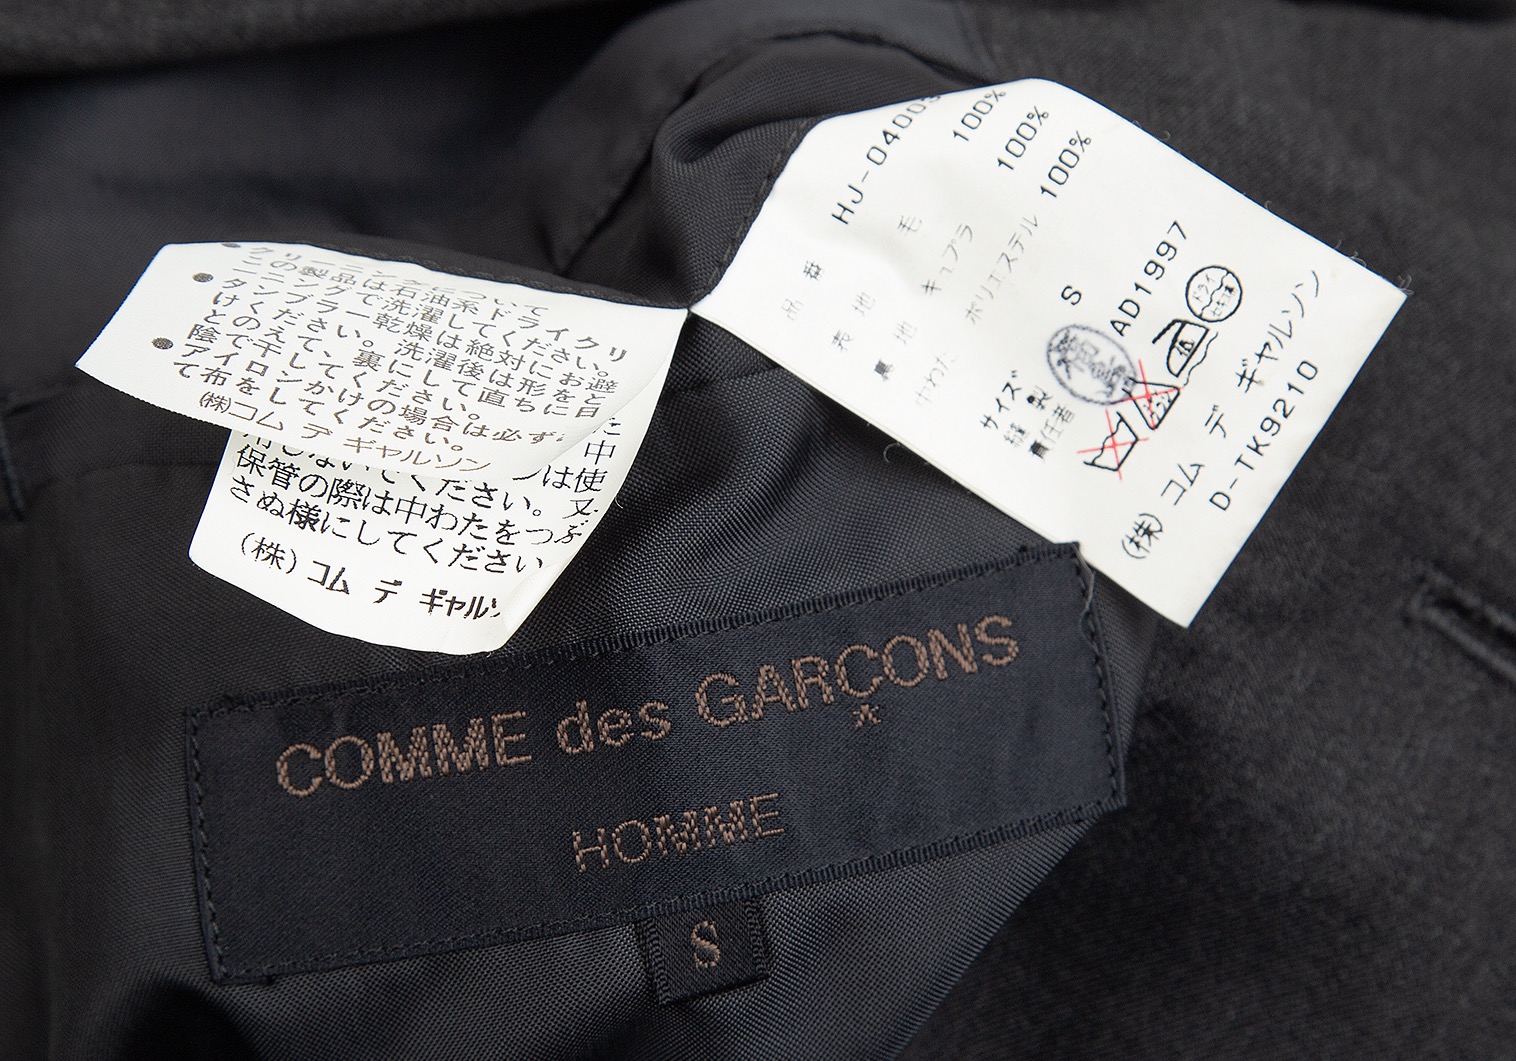 COMME des GARCONS HOMME 3B キルティング セットアップ